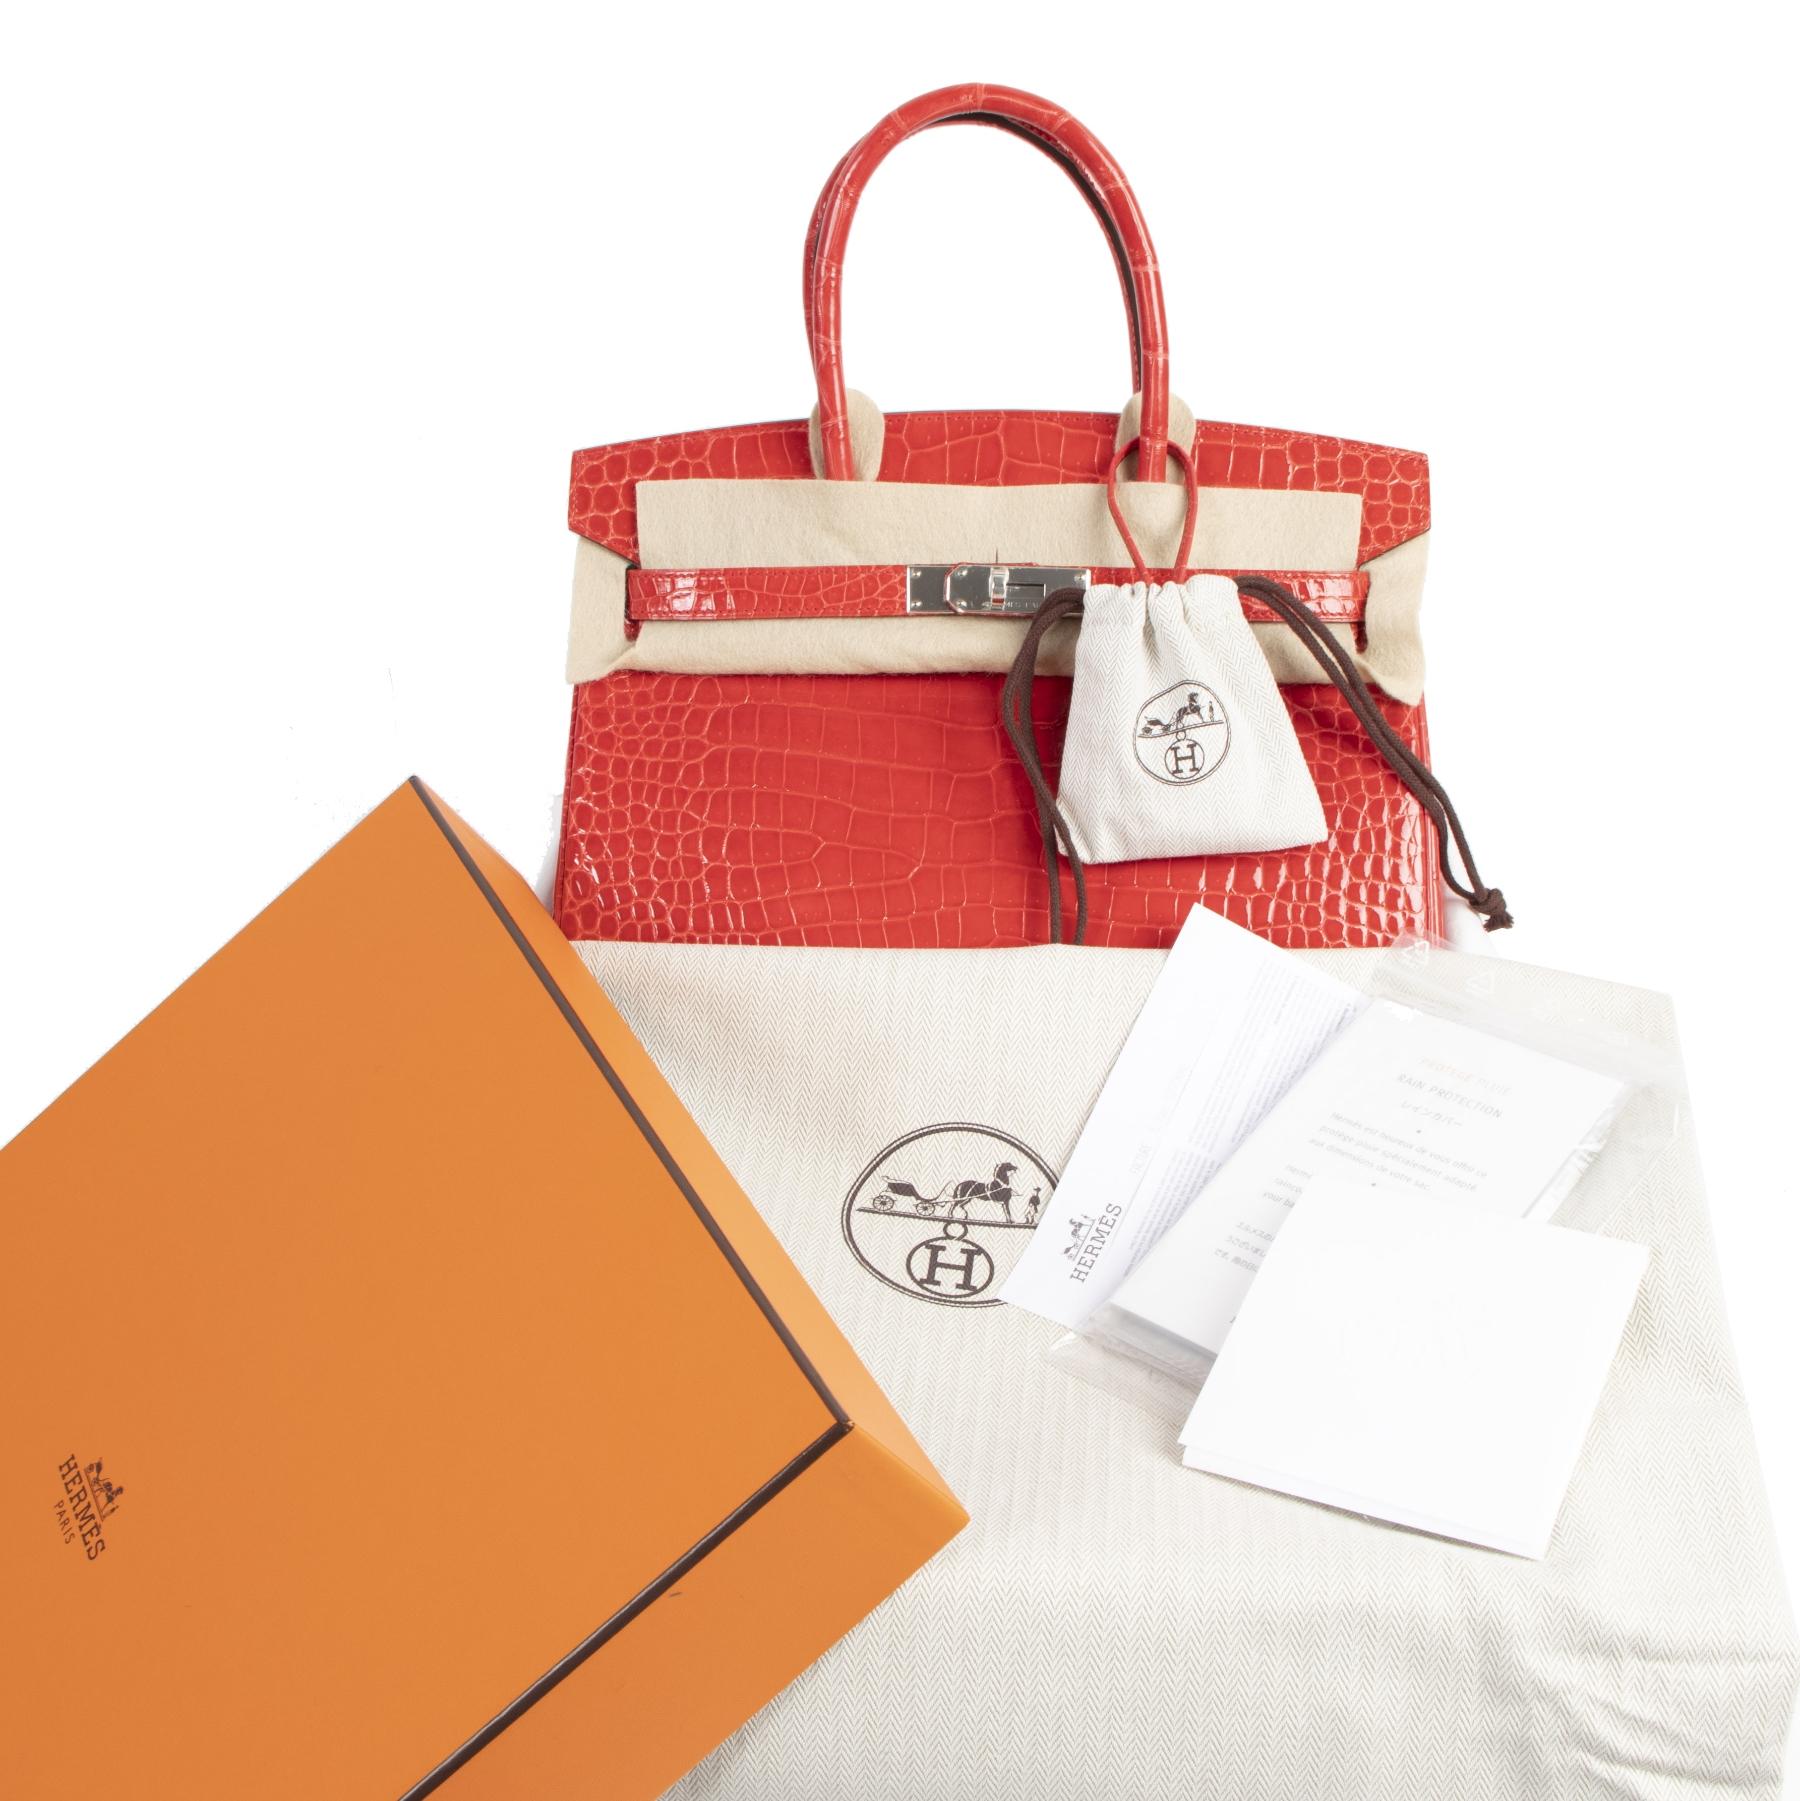 NEW AND NEVER WORN

Hermès Birkin 30 Rouge de Coeur Crocodile Porosus PHW

This collector's piece is ready to crown any Hermès collection. The sumptuous Porosus crocodile skin is drenched in eye-catching Rouge de Coeur hue. Finished with